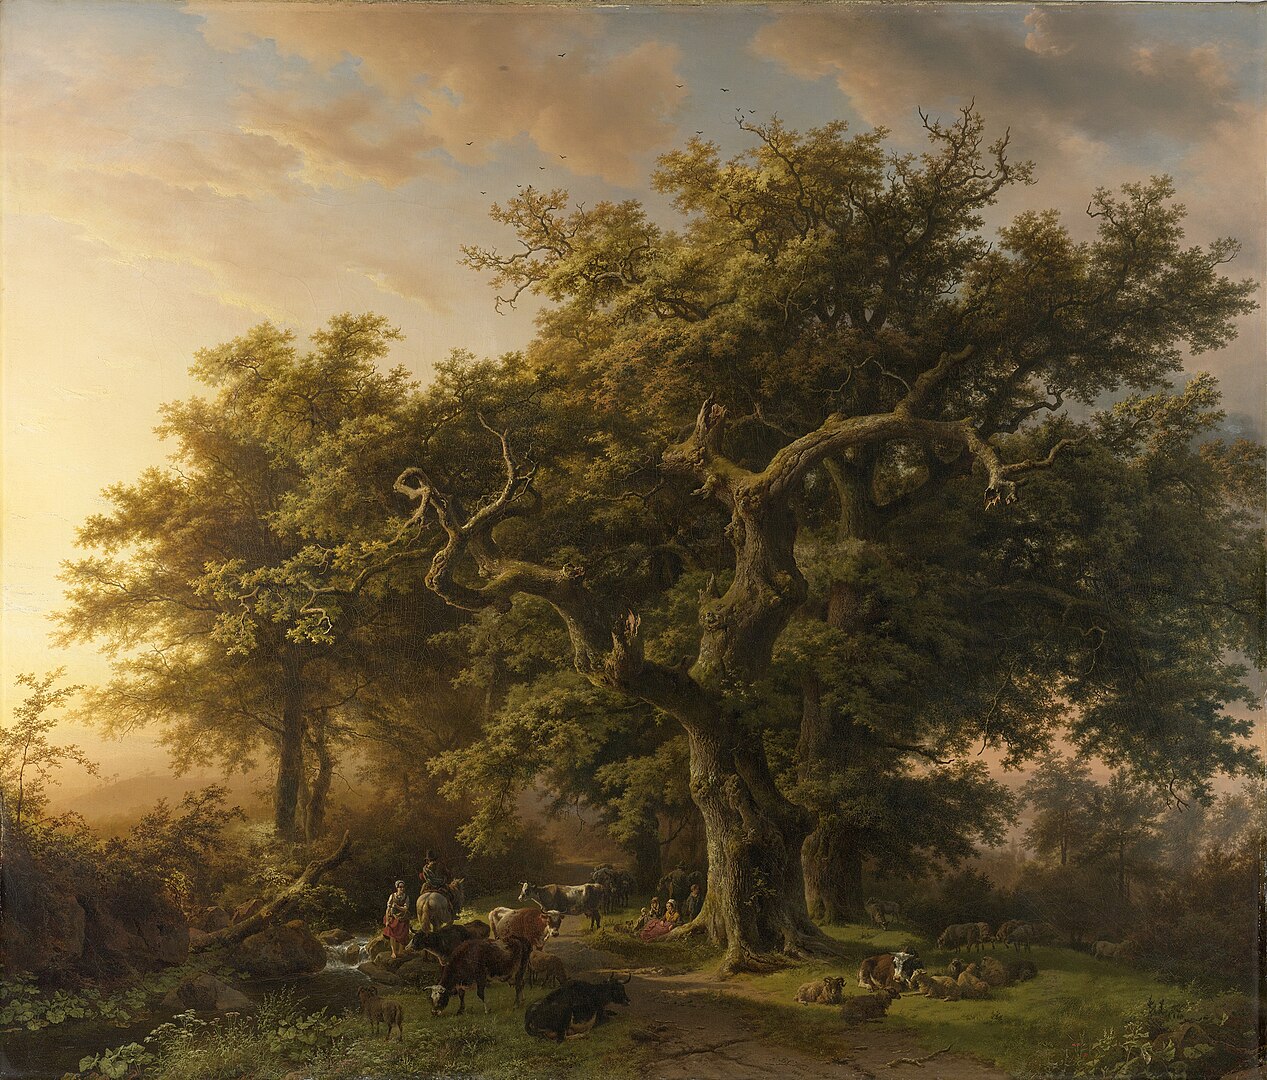 A landscape view of a large tree in a forest with farmers and cattle gathered below